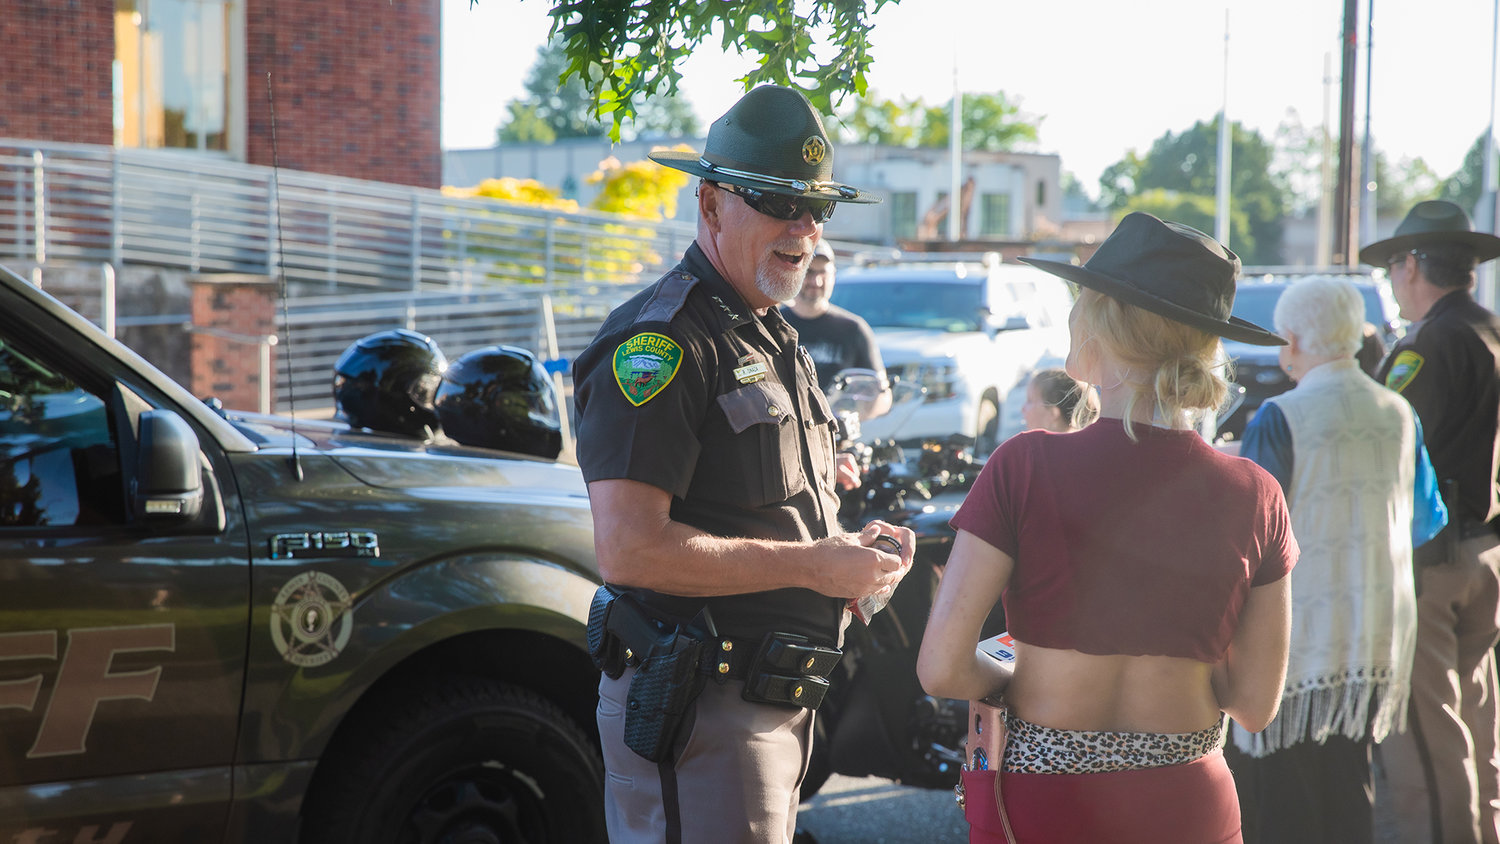 Rob Snaza, with the Lewis County Sheriff’s Office, smiles while greeting attendees of a National Night Out event hosted Tuesday night at George Washington Park in Centralia.